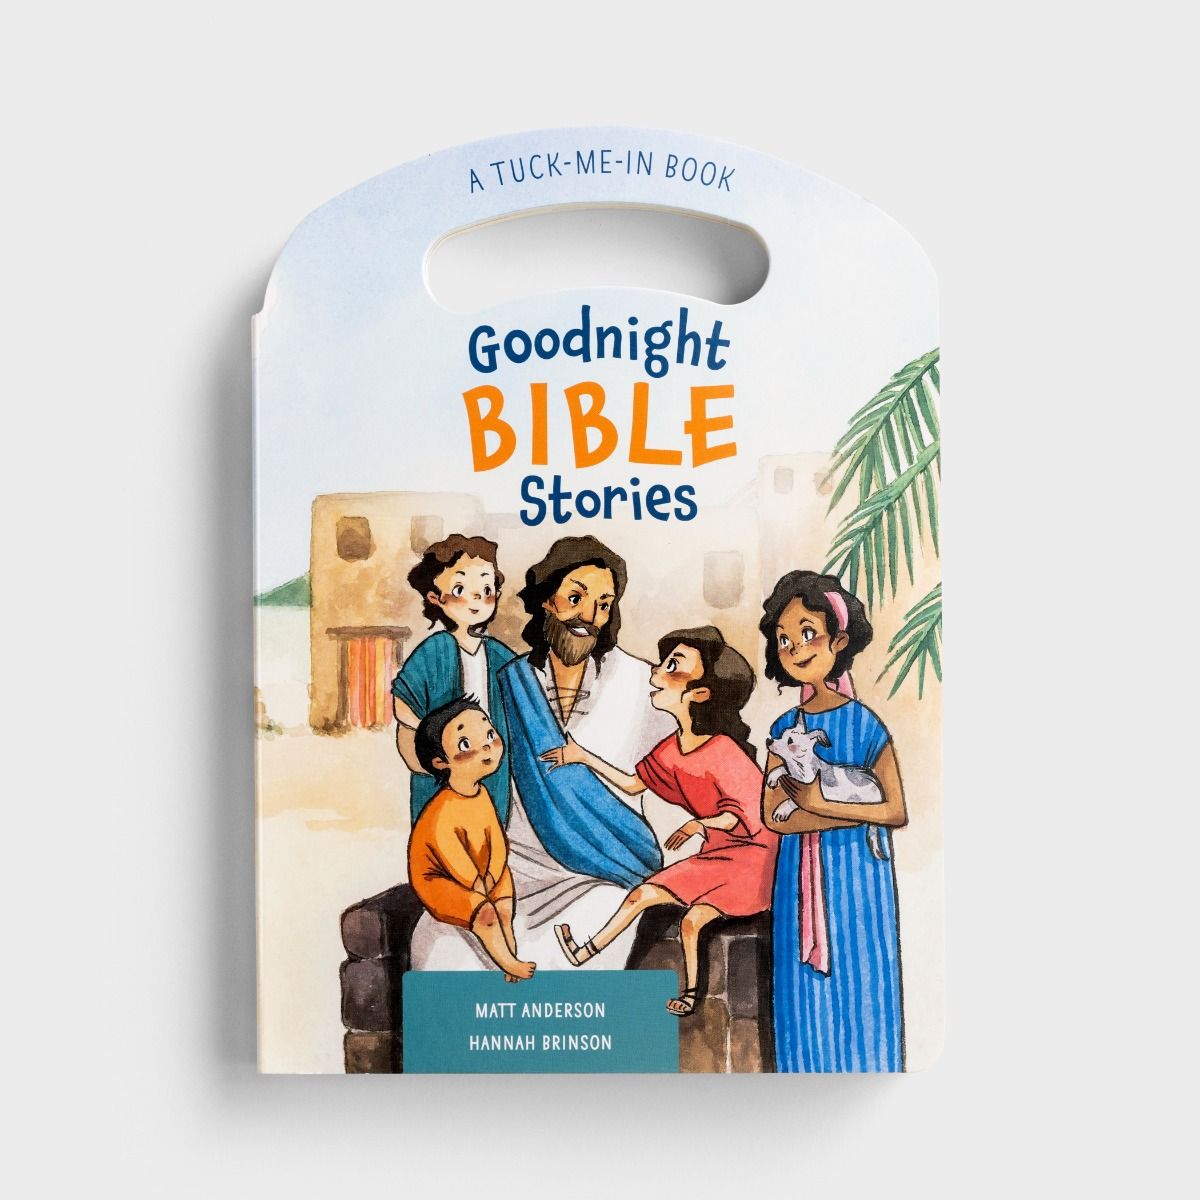 Goodnight Bible Stories by Matt Anderson and Hannah Brinson